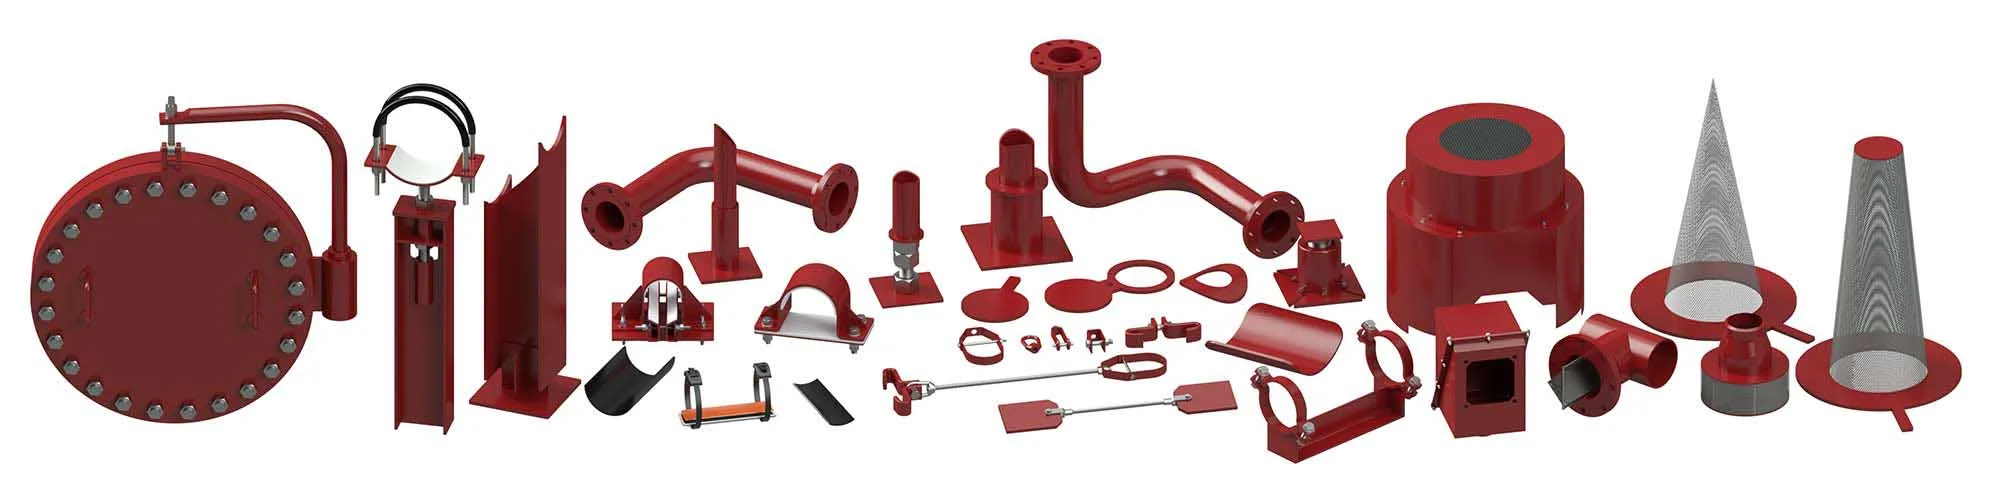 an image of a collage of products manufactured by RedLineIPS by Cogbill, some of the products include pipe supports, shimblocks, pipe clamps, pipe hangers and accessories, paddle blinds, pipe shoes, pipe spools, and strainers